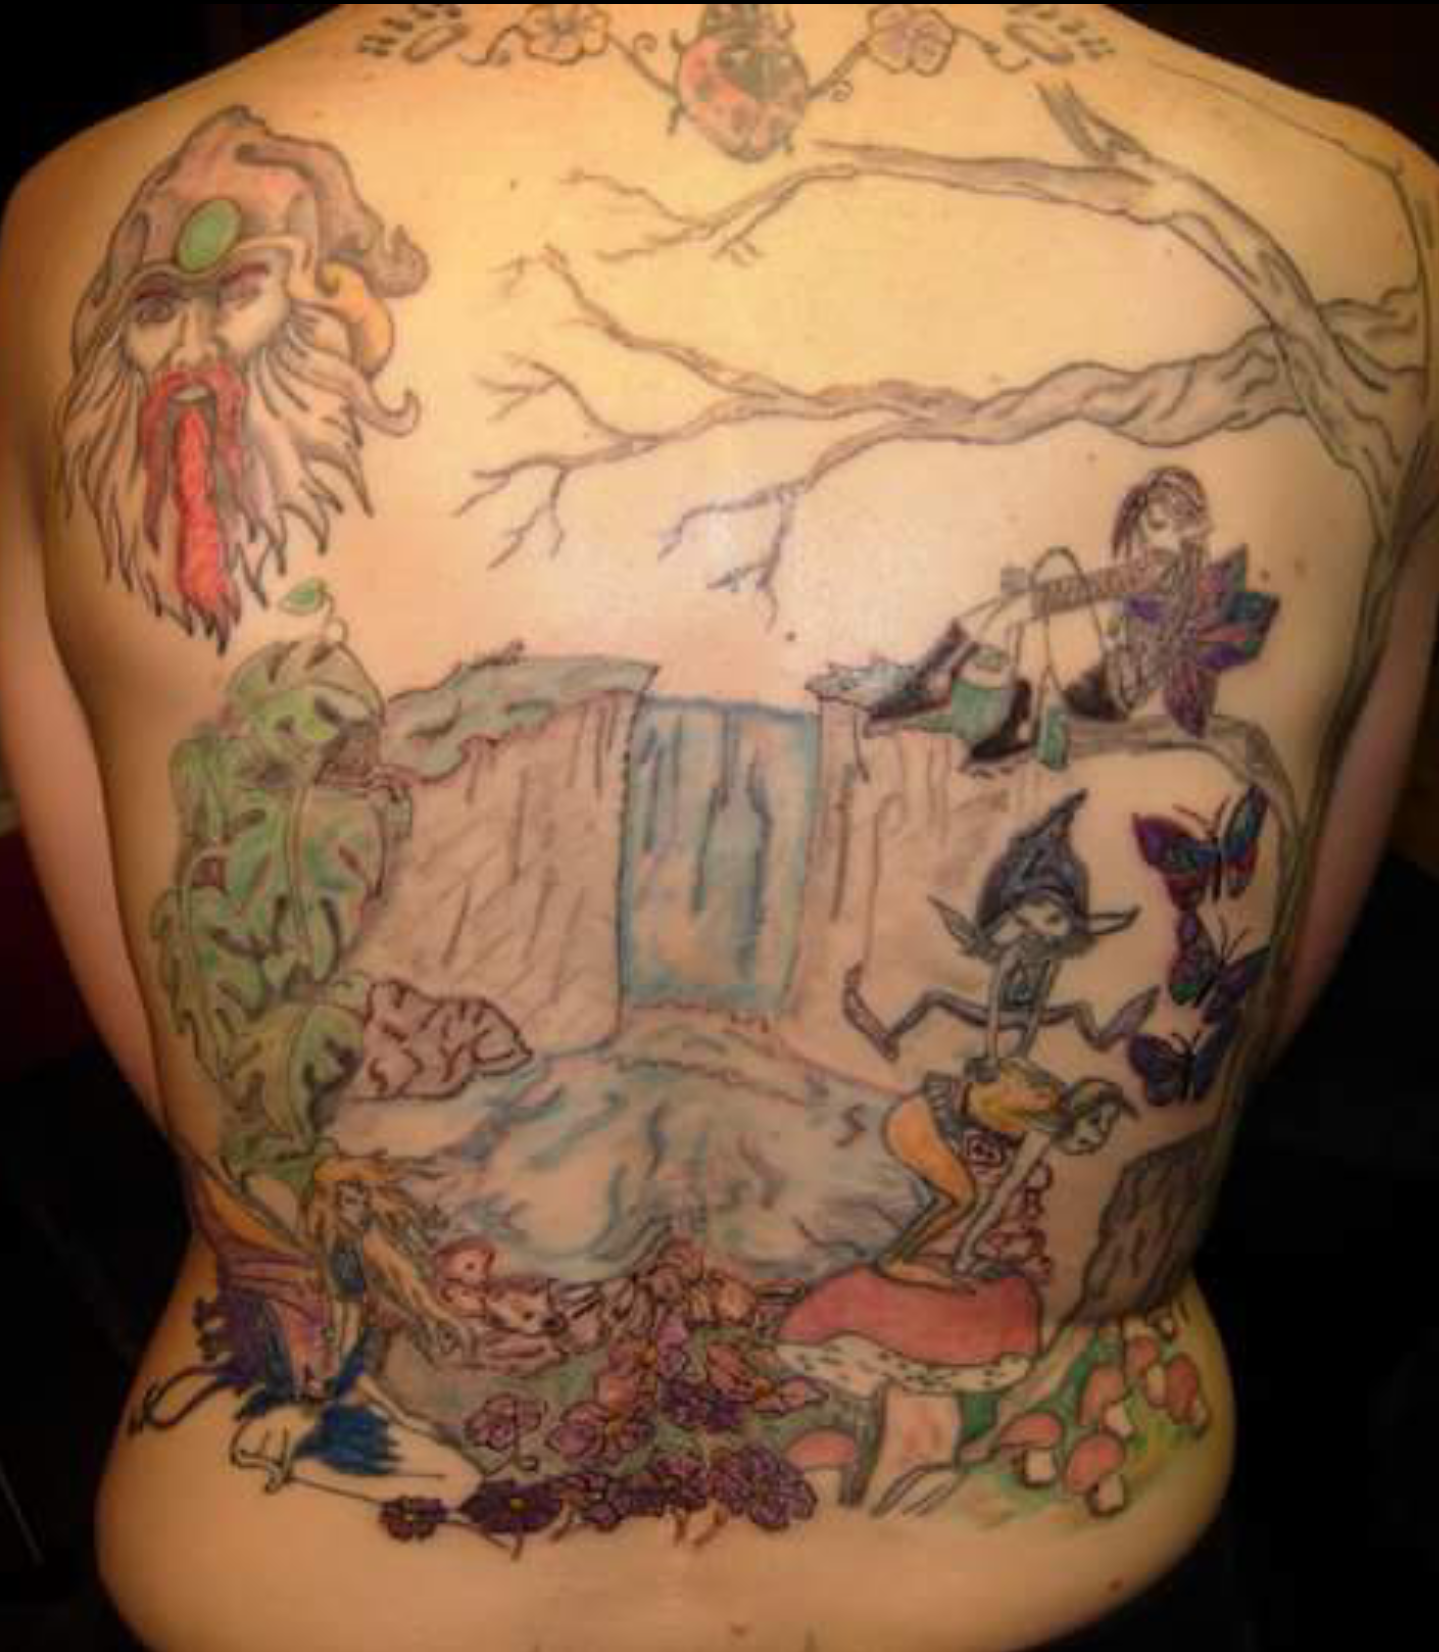 forest scene tattoo that didn't come out well.